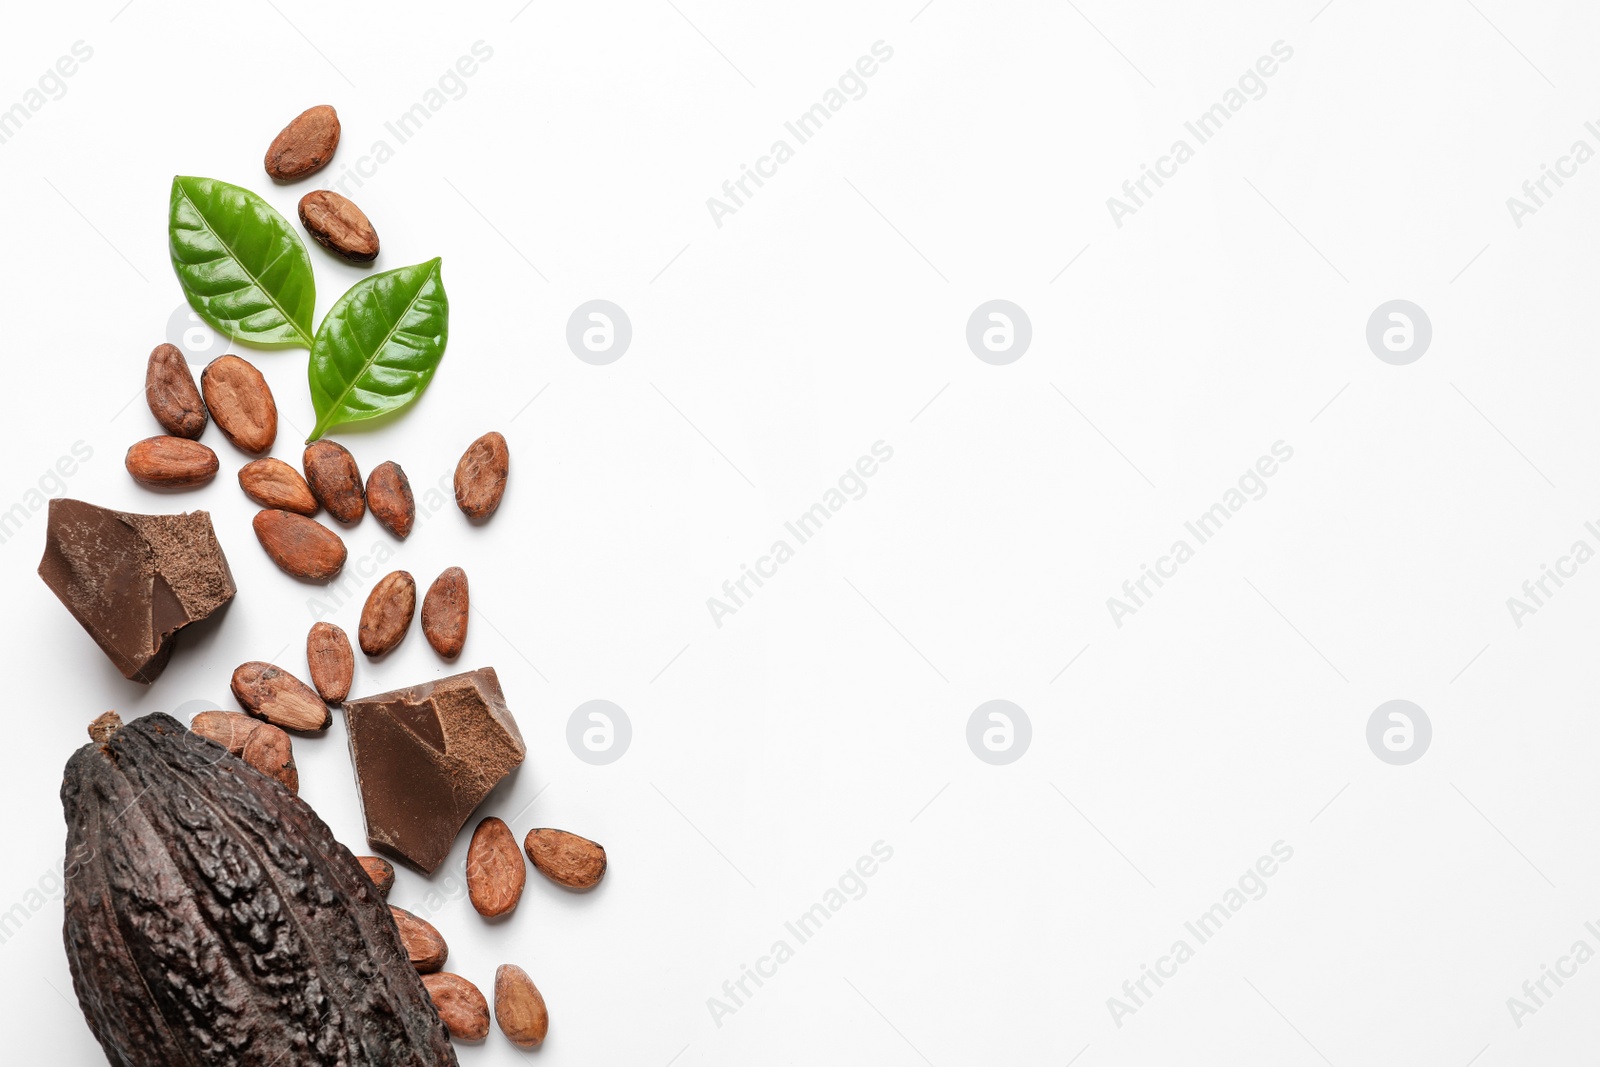 Photo of Cocoa pod with beans and chocolate pieces on white background, top view